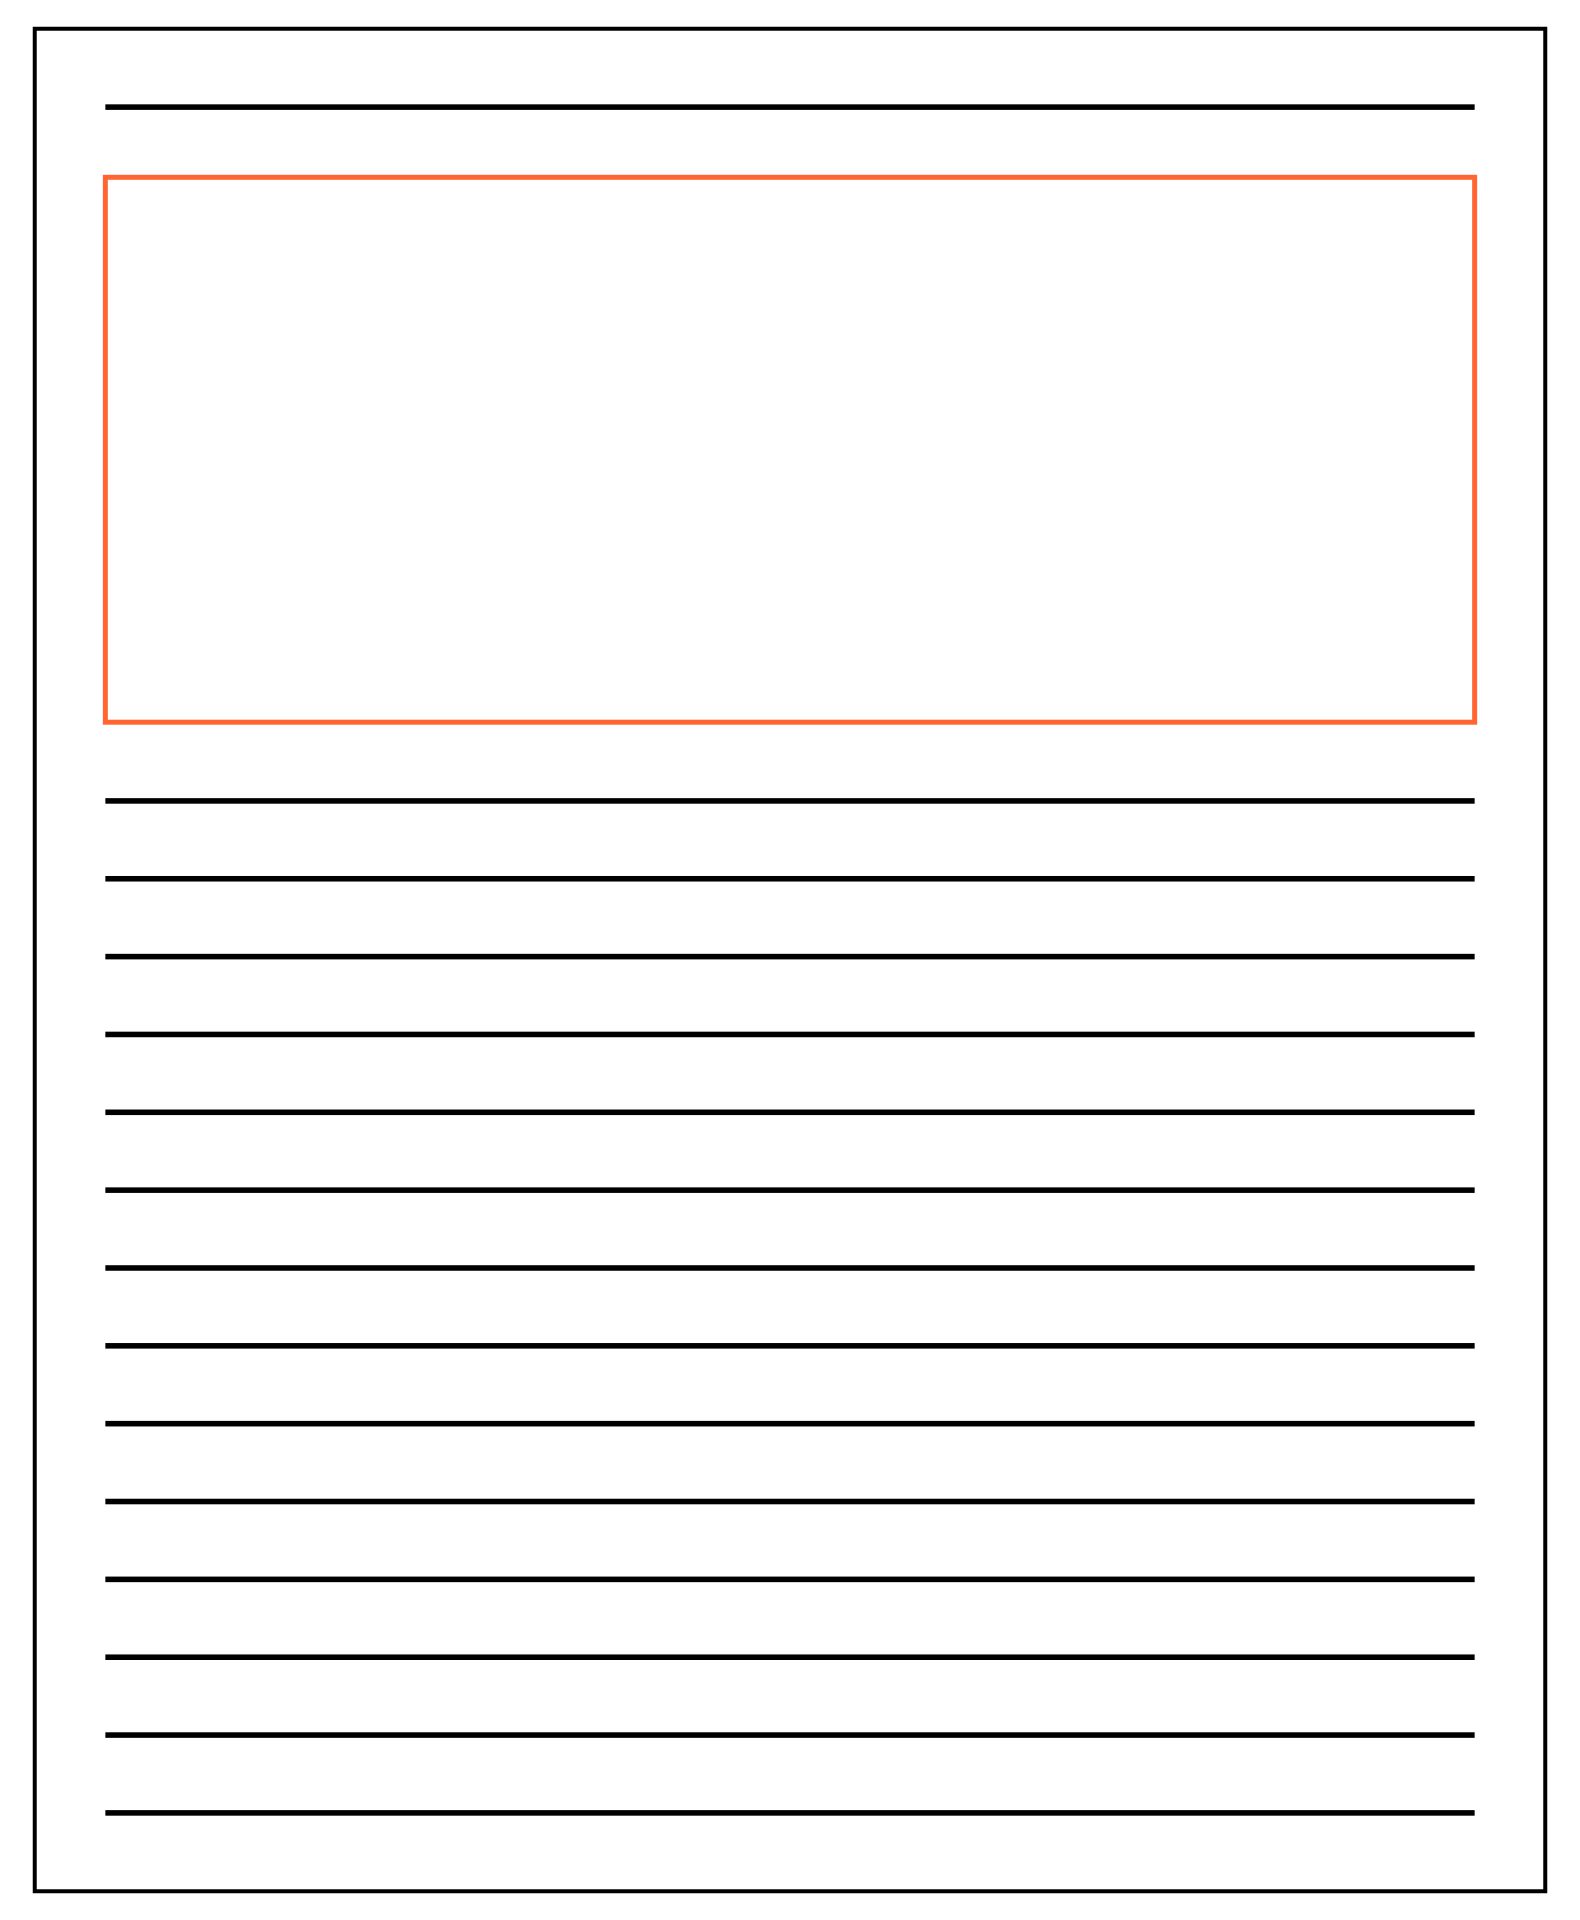 Printable Lined Writing Paper Template With Box_86514